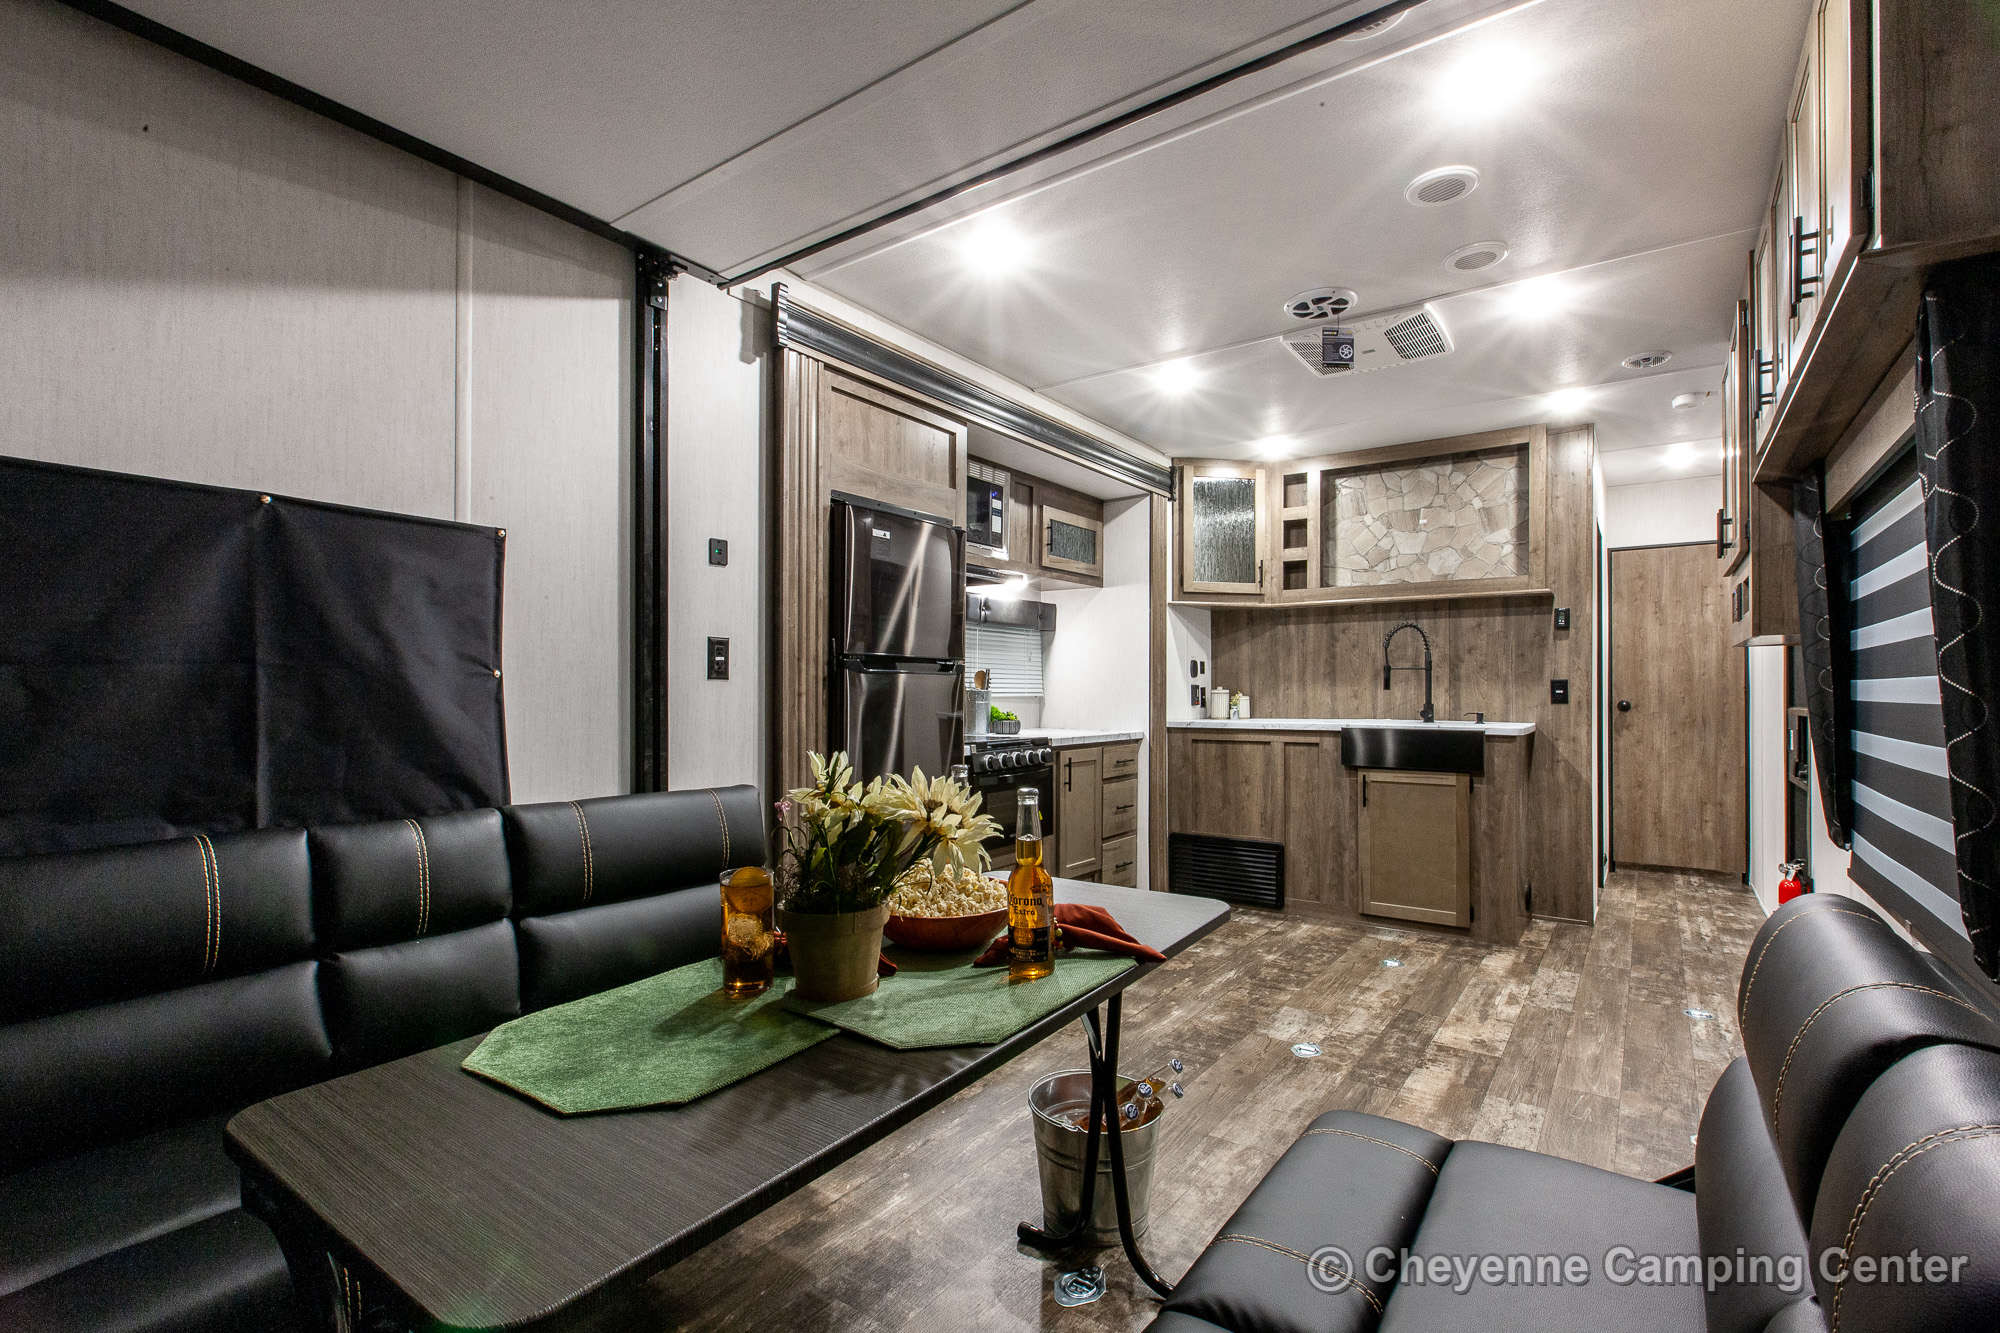 2022 Forest River Cherokee Wolf Pack 23PACK15 Bunkhouse Toy Hauler Travel Trailer Interior Image